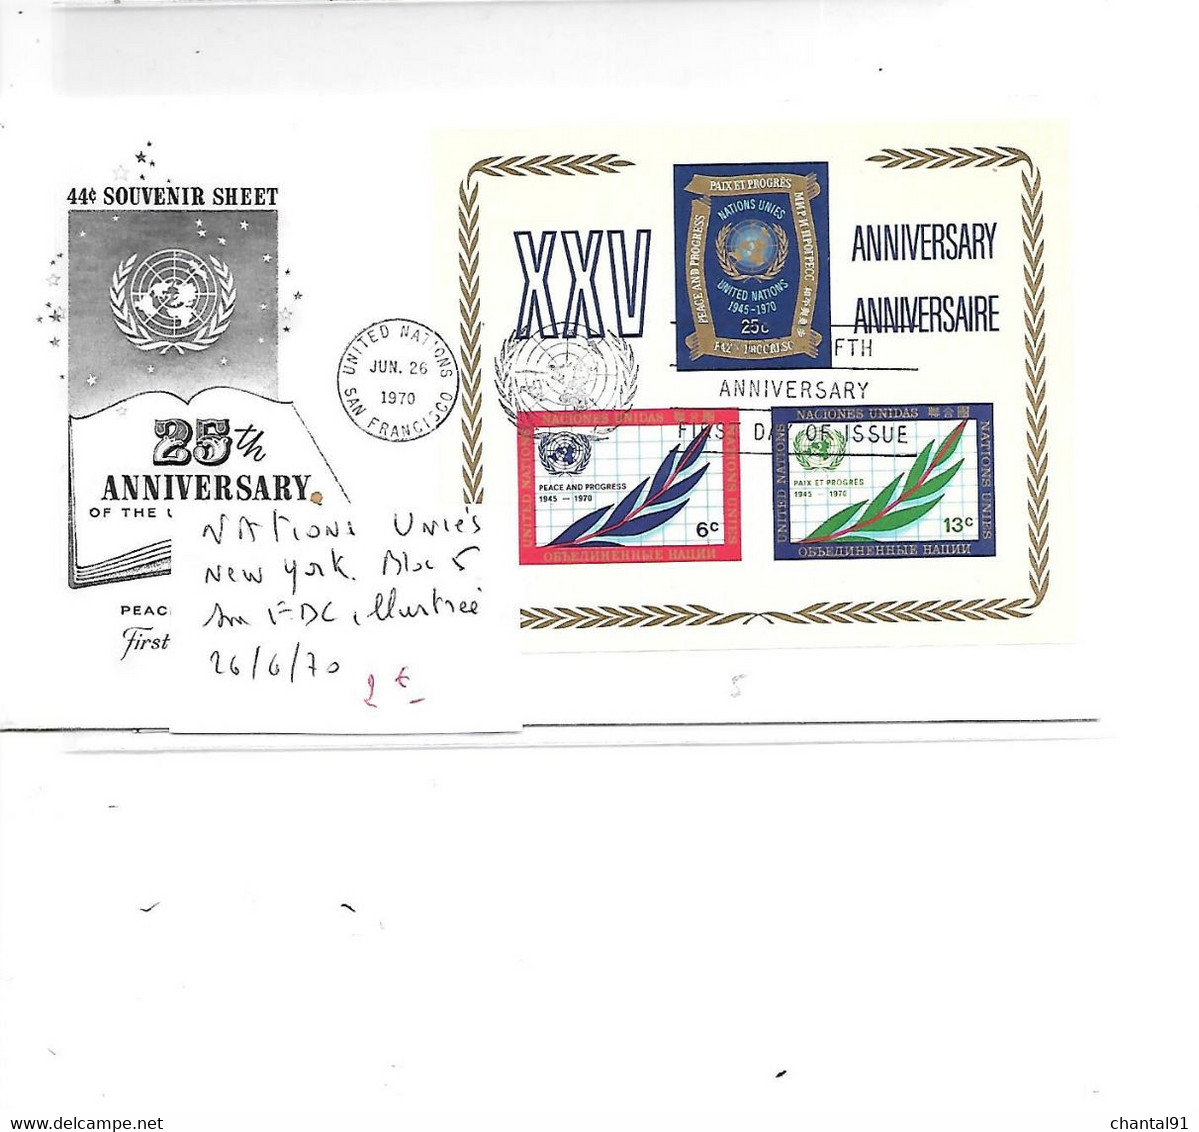 NATIONS UNIES NEW YORK N° BLOC 5 SUR FDC ILLUSTREE 26.6.1970 - Covers & Documents